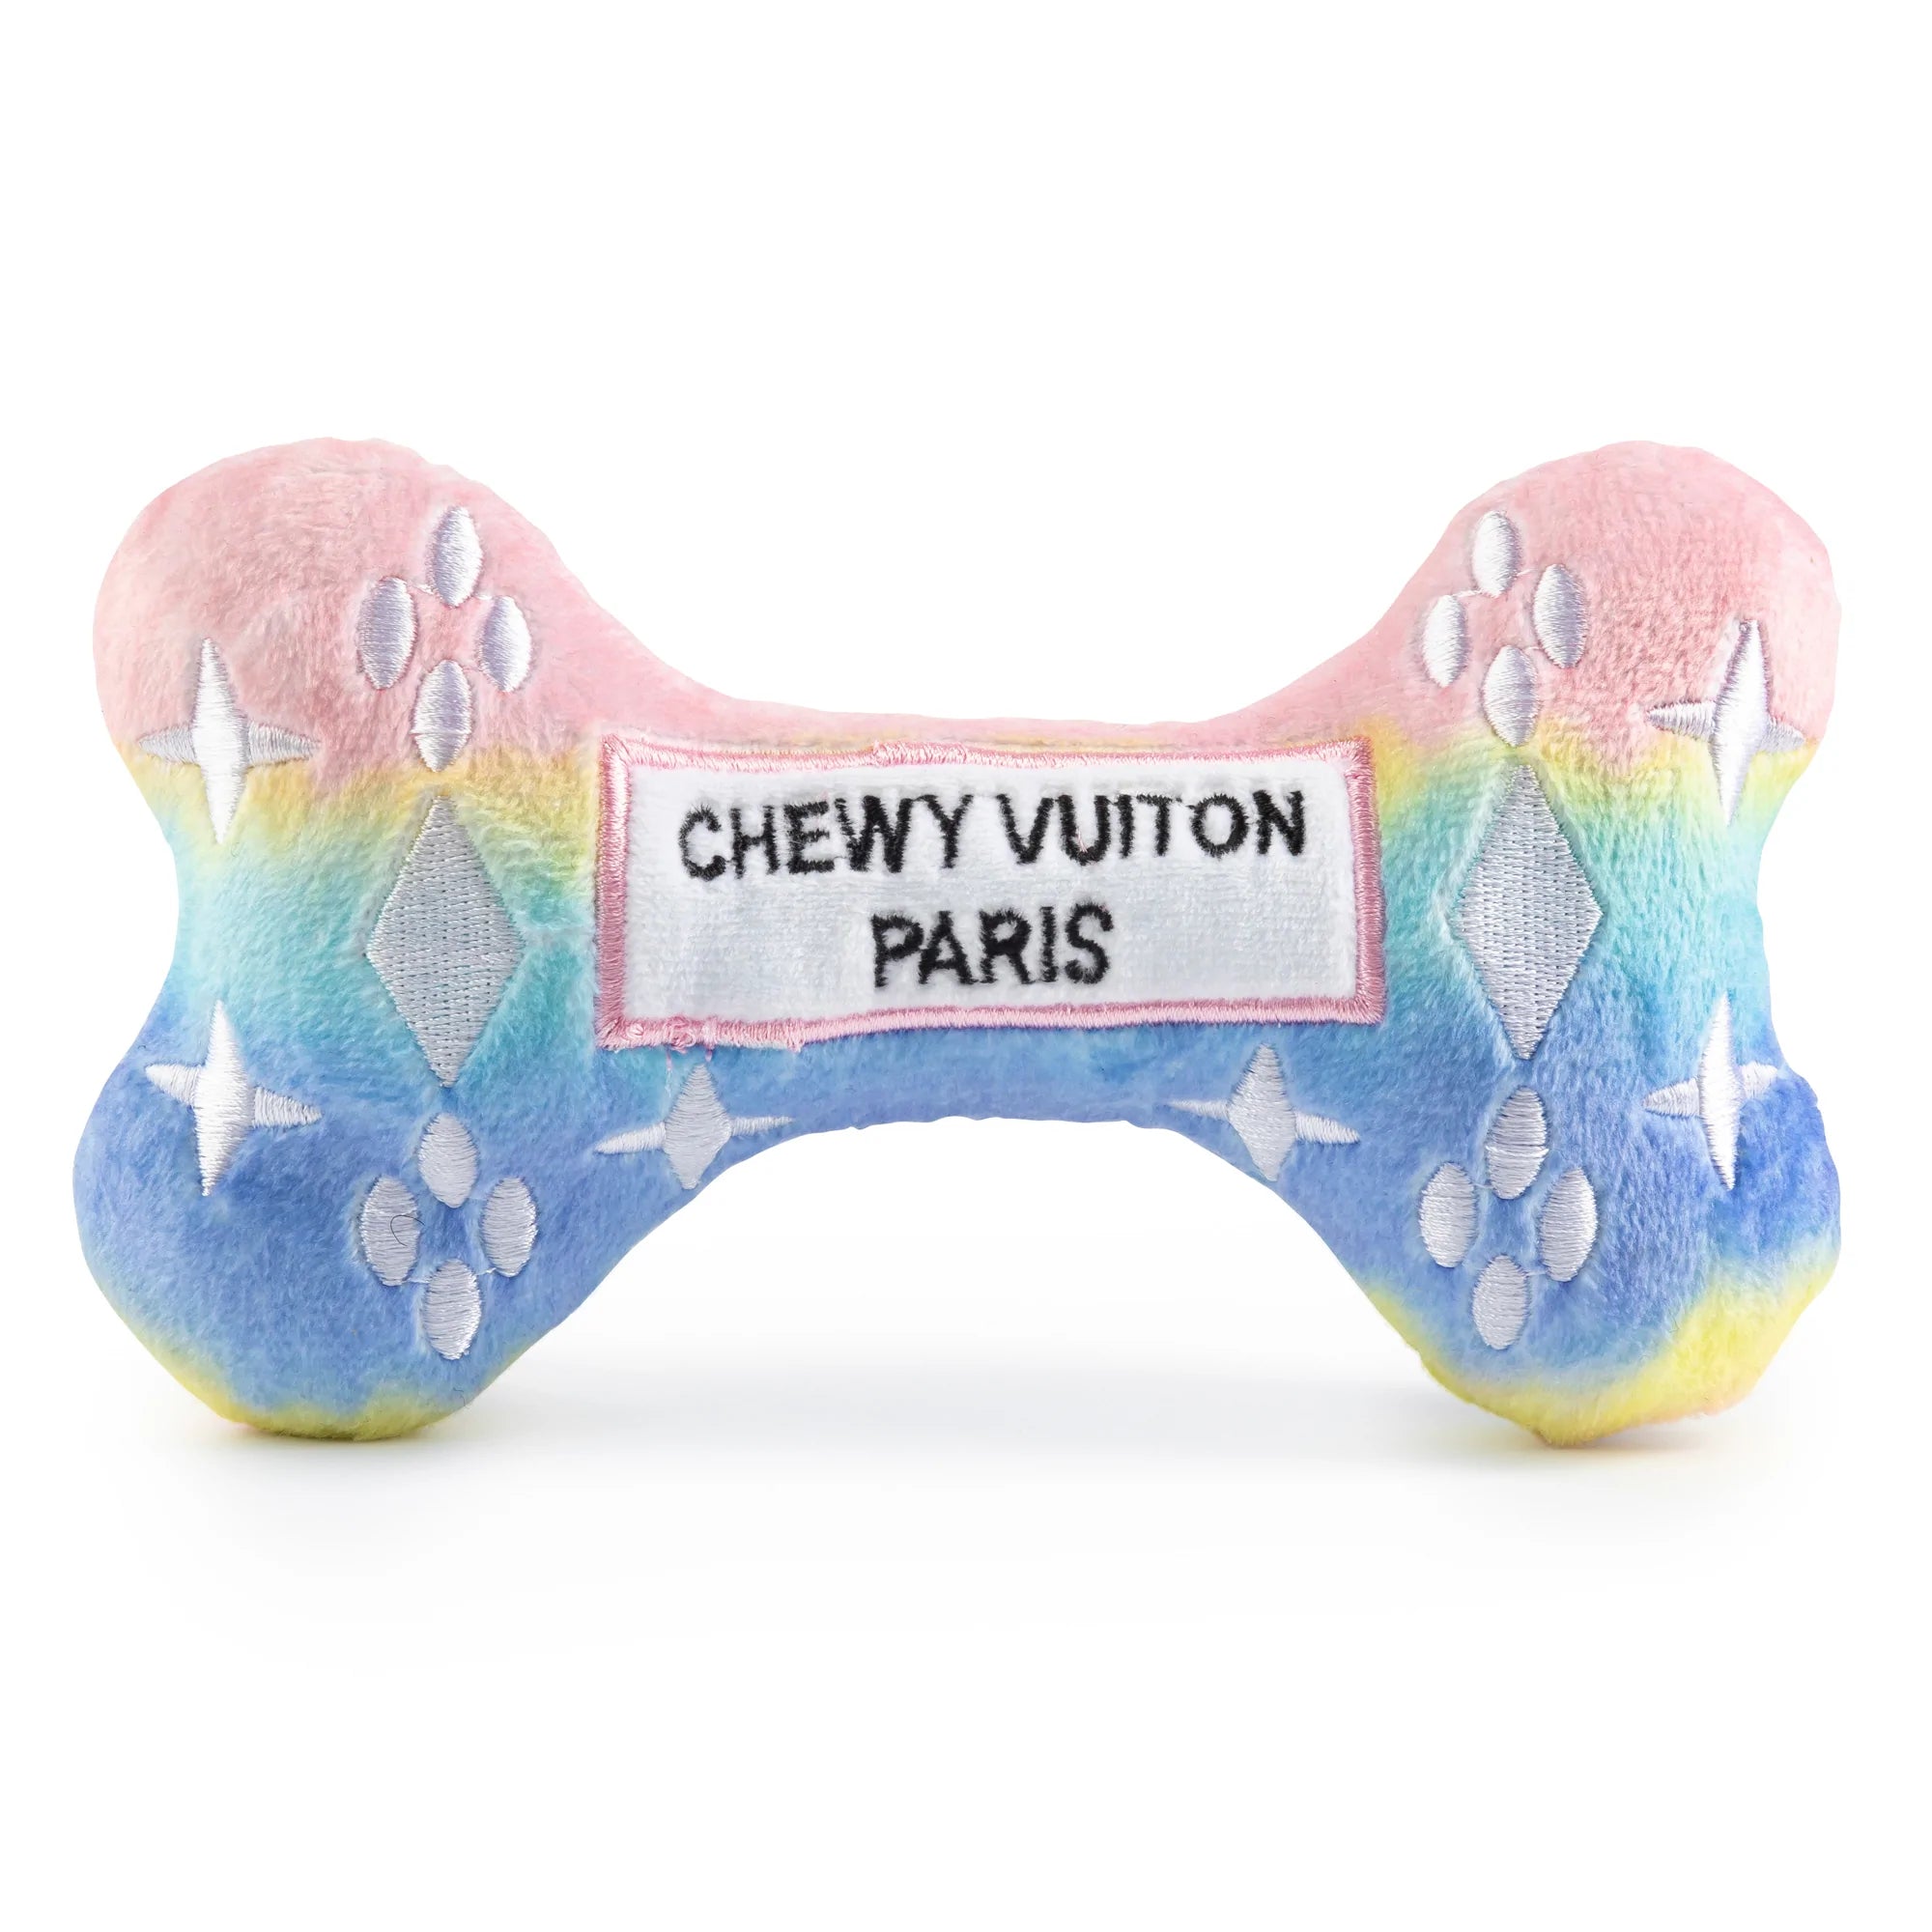 Pampered Pooch Perfection: Parody Chewy Vuiton Plush Dog Toys